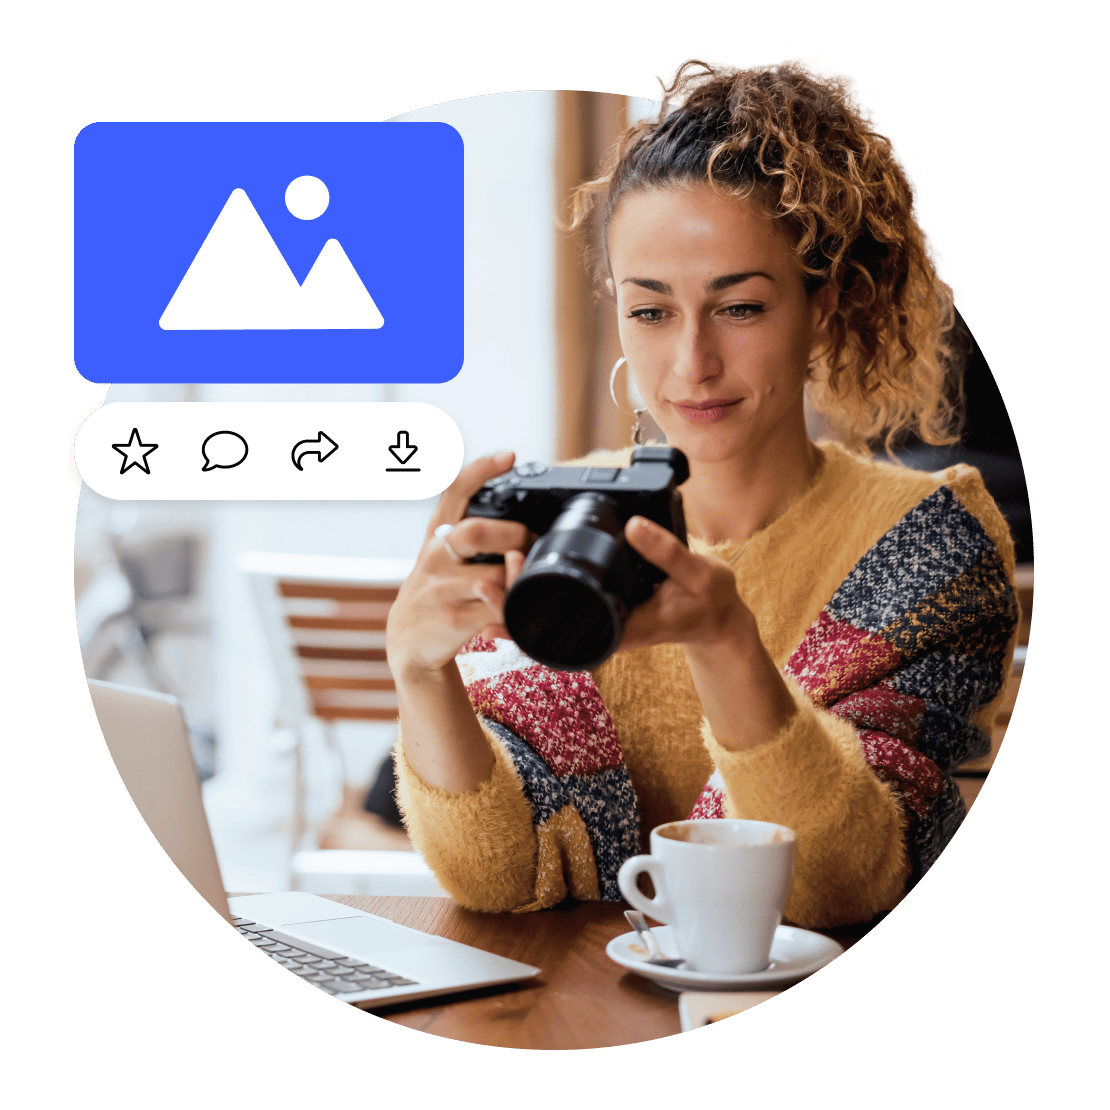 A woman using NordVPN to browse Flickr and share her photos securely.